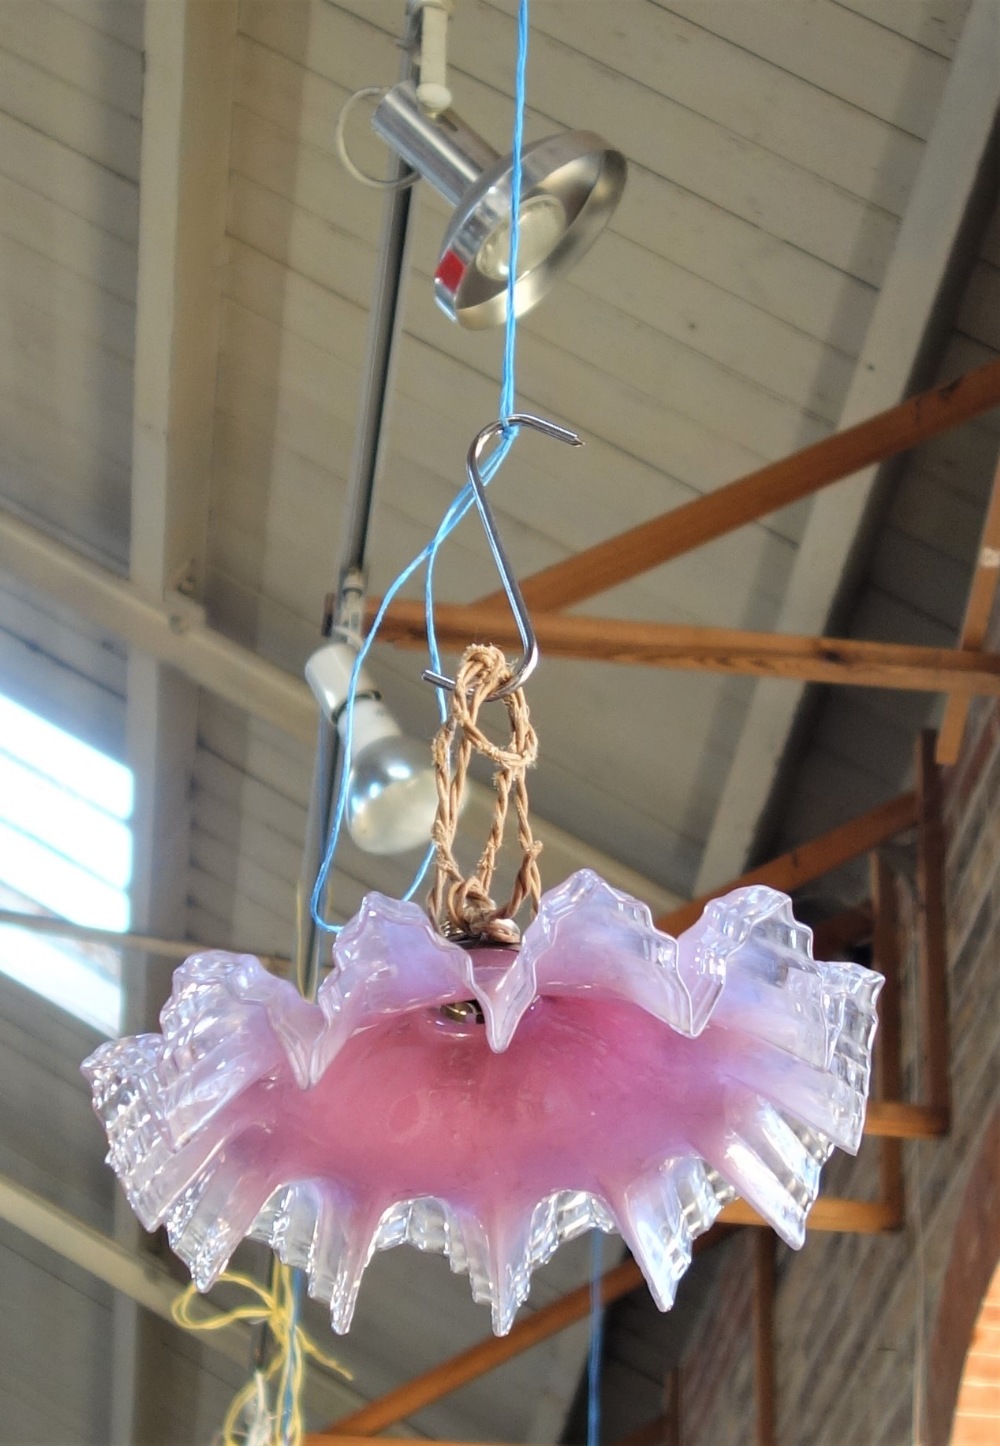 AN EARLY 20TH CENTURY PINK "VASELINE" TYPE FRILLED HANGING LIGHT SHADE